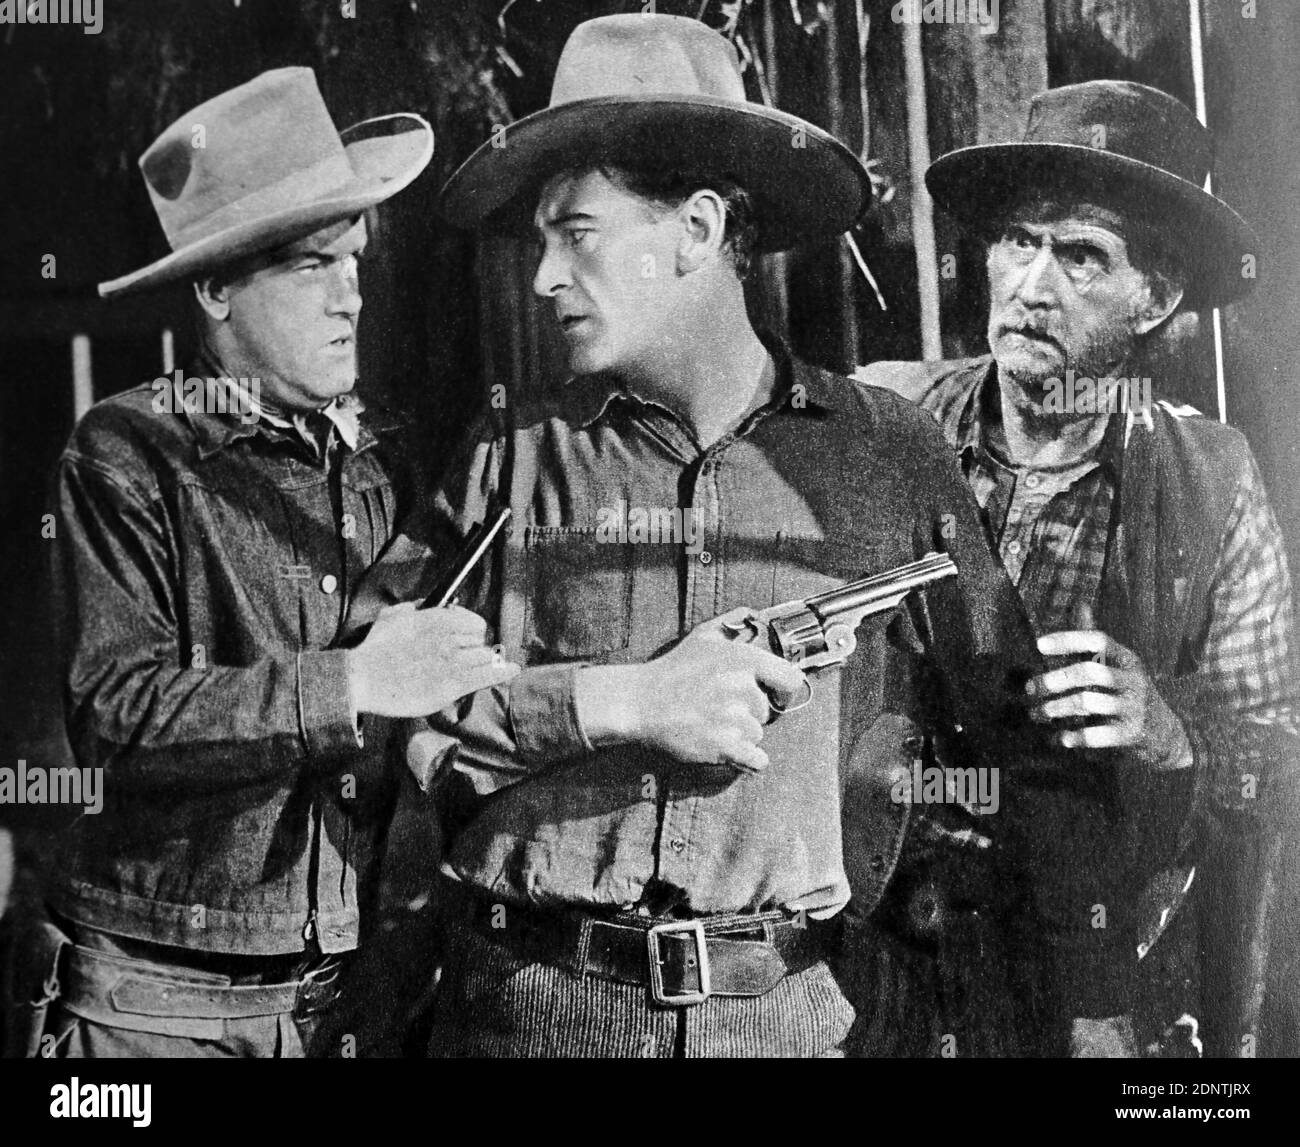 Film still from 'Along Came Jones' starring Gary Cooper, Loretta Young, William Demarest, and Dan Duryea. Stock Photo